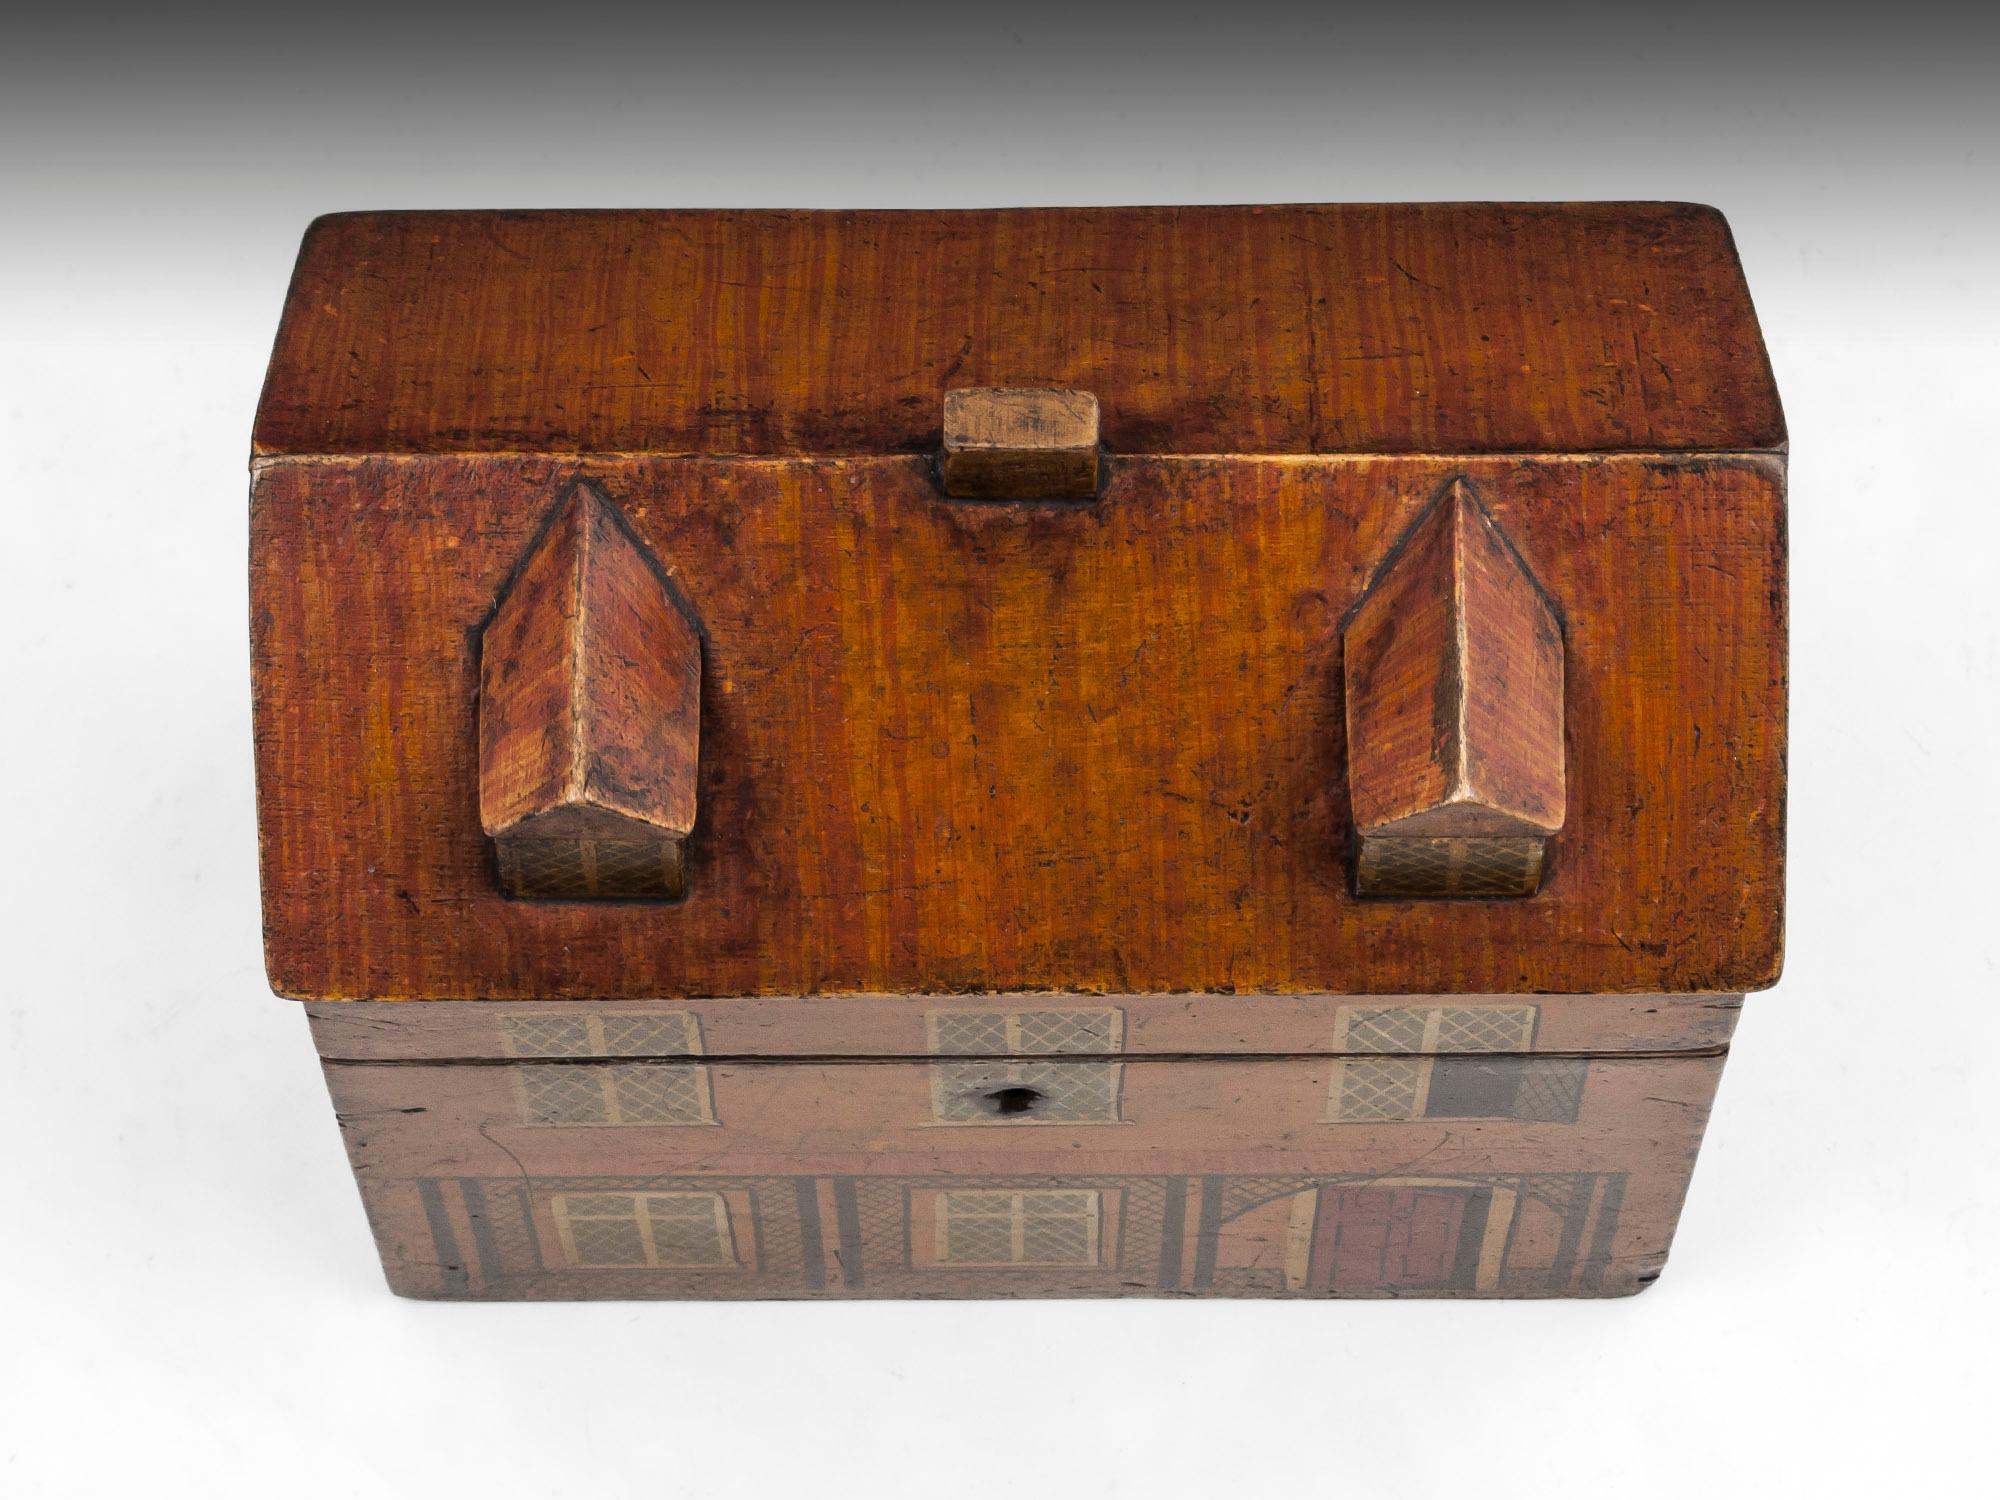 British Antique Folk Art Cottage Tea Caddy, Early 19th Century For Sale